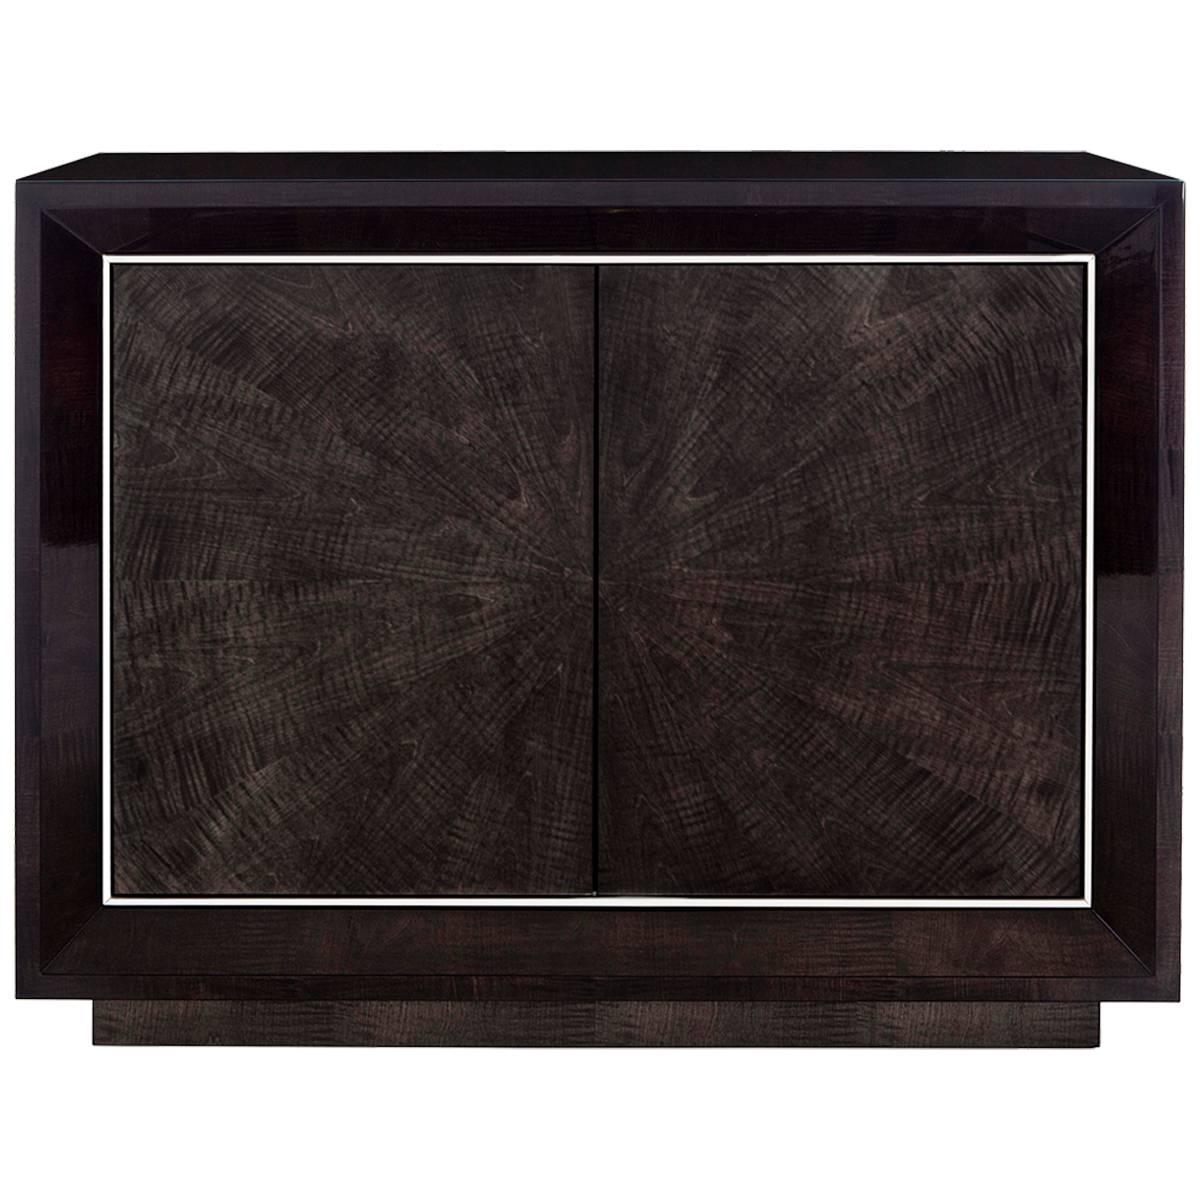 Davidson's Modern, Chiltern Side Cabinet, in Sycamore Black and Polished Nickel